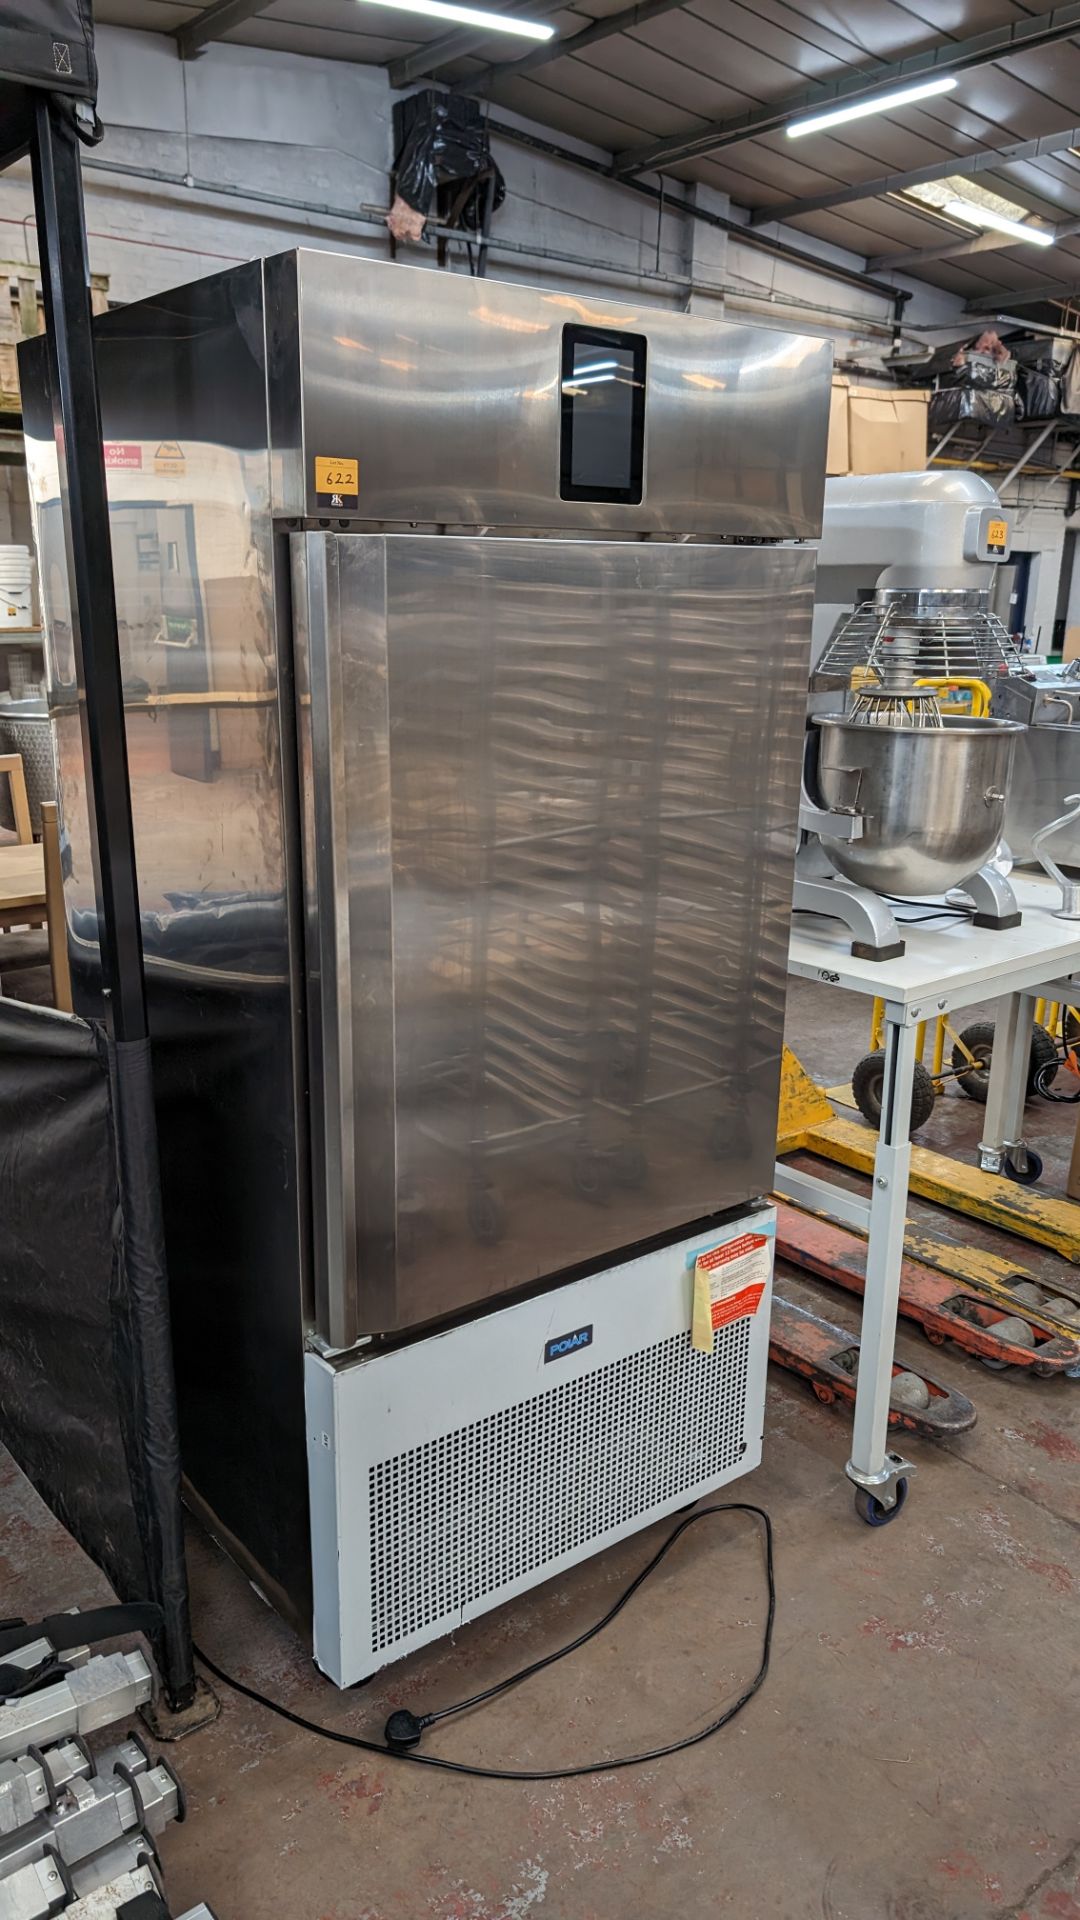 Polar Refrigeration mobile stainless steel commercial blast chiller with touchscreen controls - Image 2 of 9